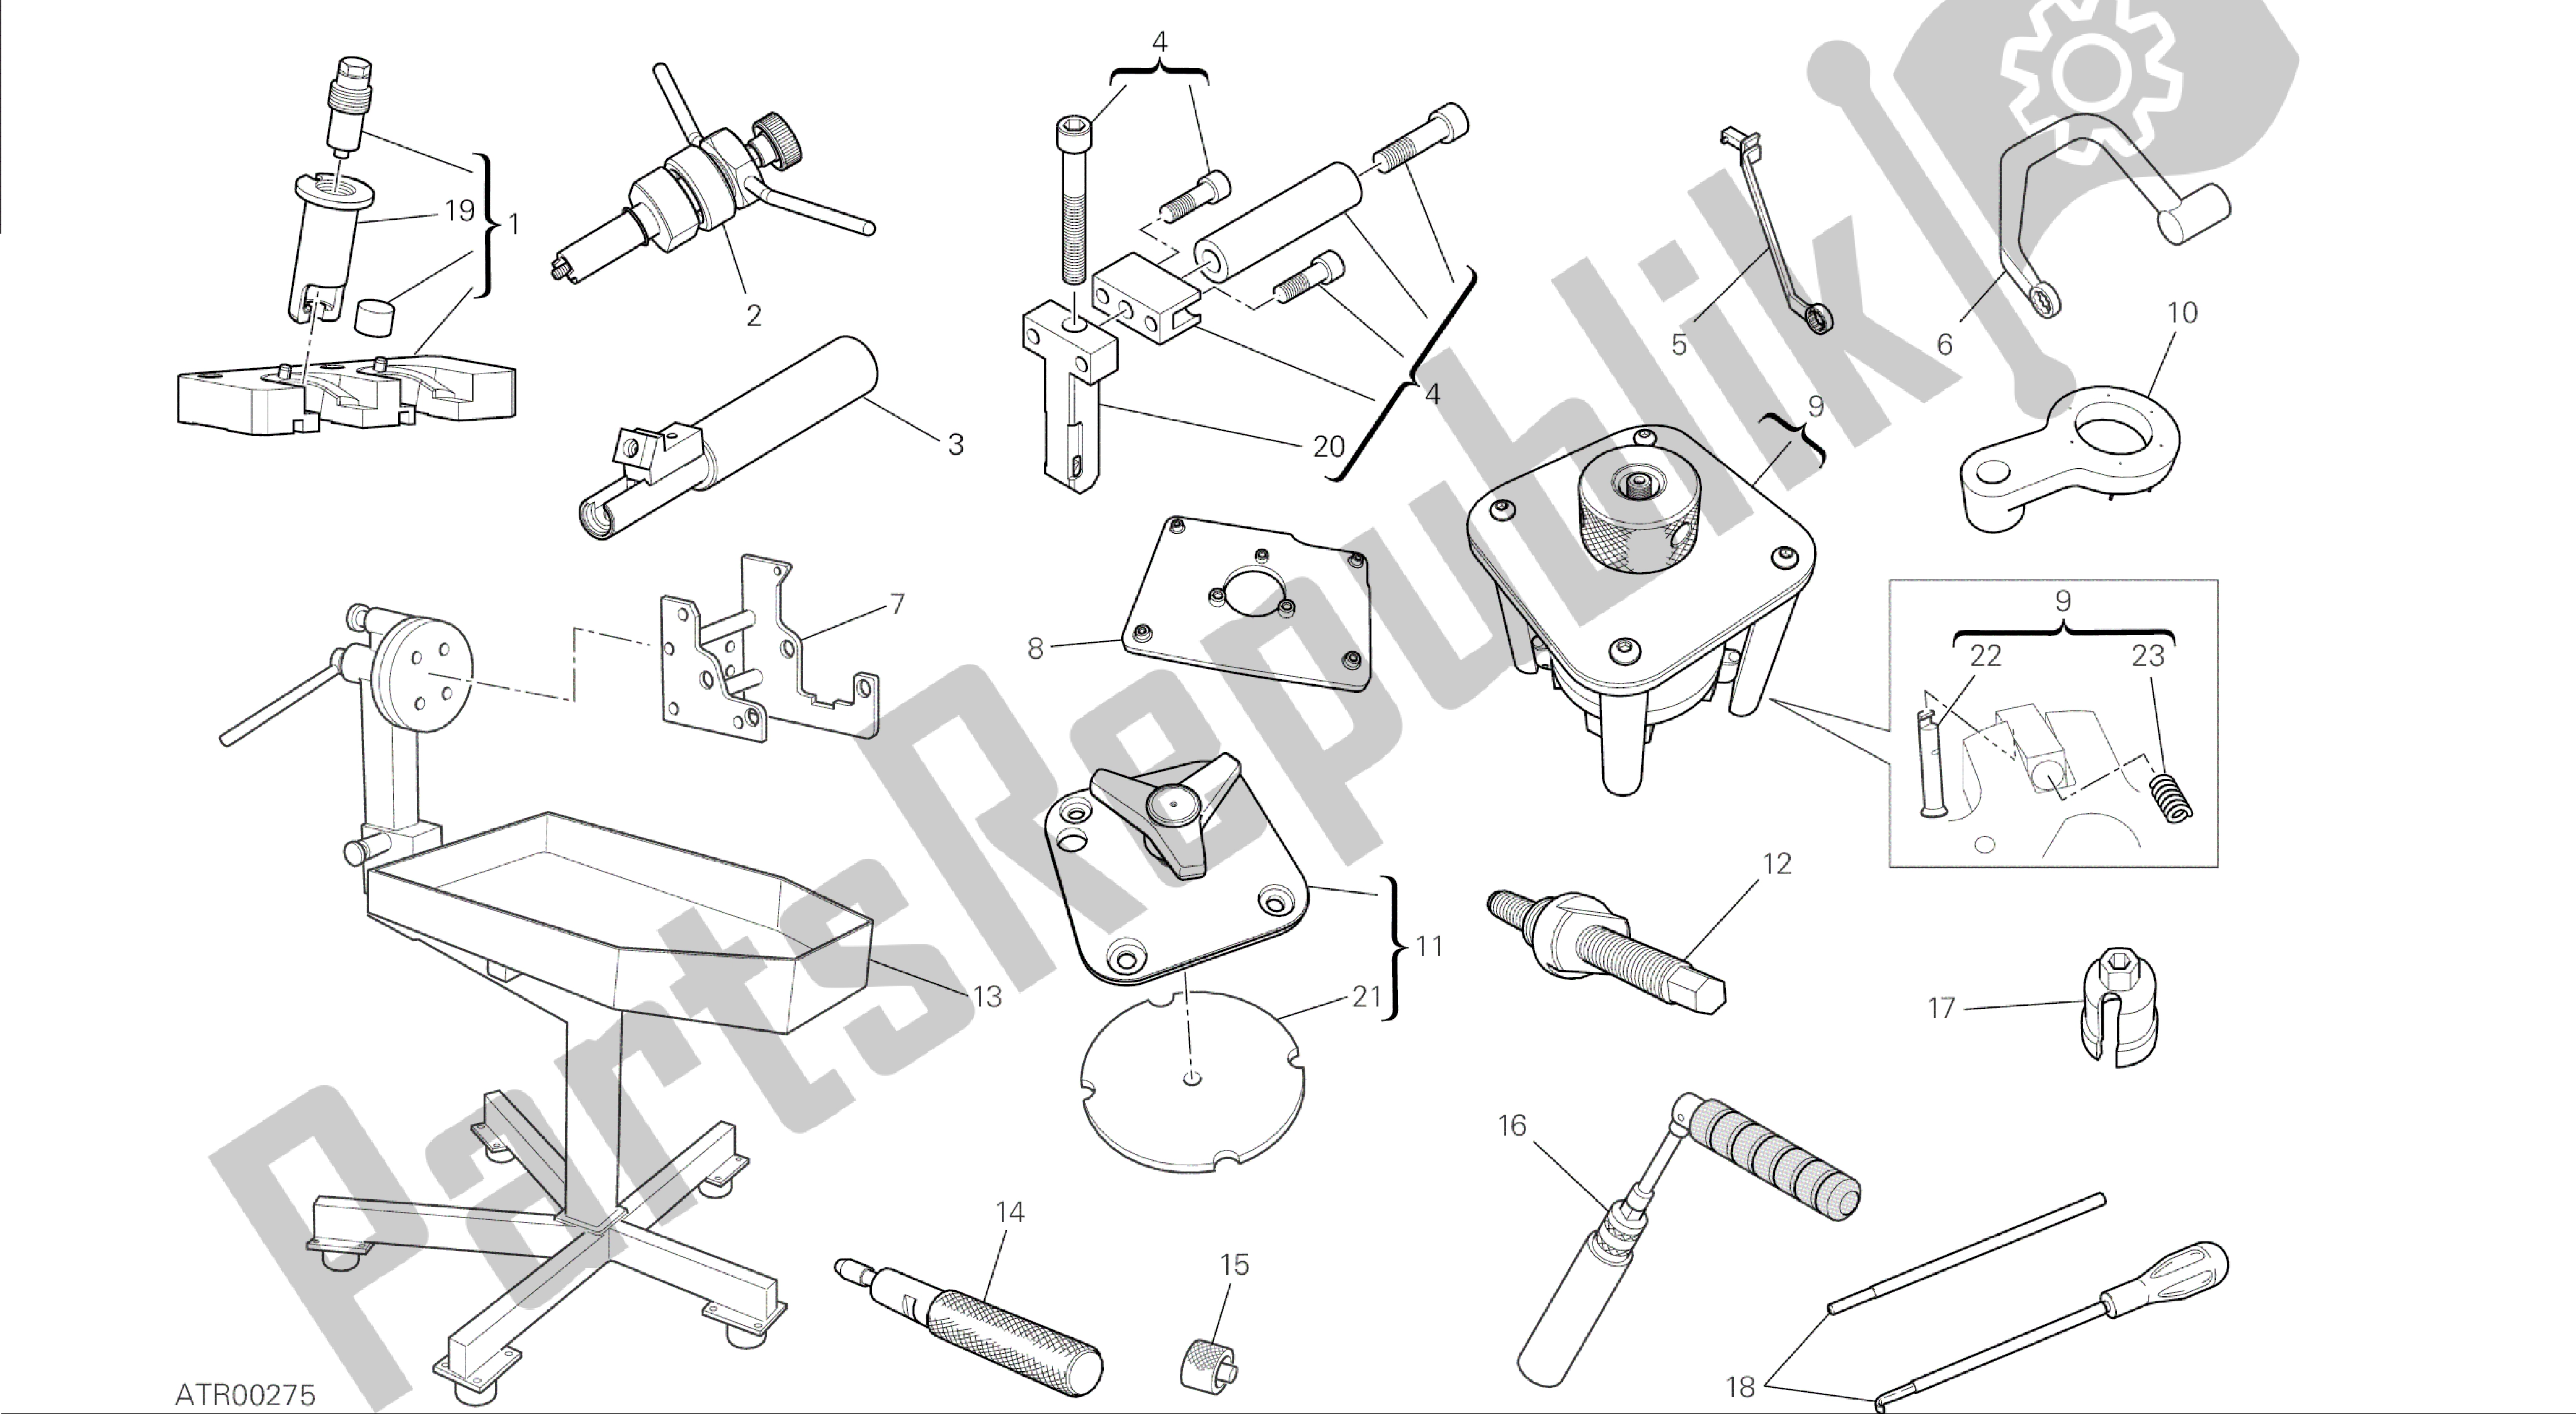 All parts for the Drawing 01b - Workshop Service Tools [mod:1199abs;xst:aus,bra,chn,eur,fra,jap]group Tools of the Ducati Panigale ABS 1199 2014